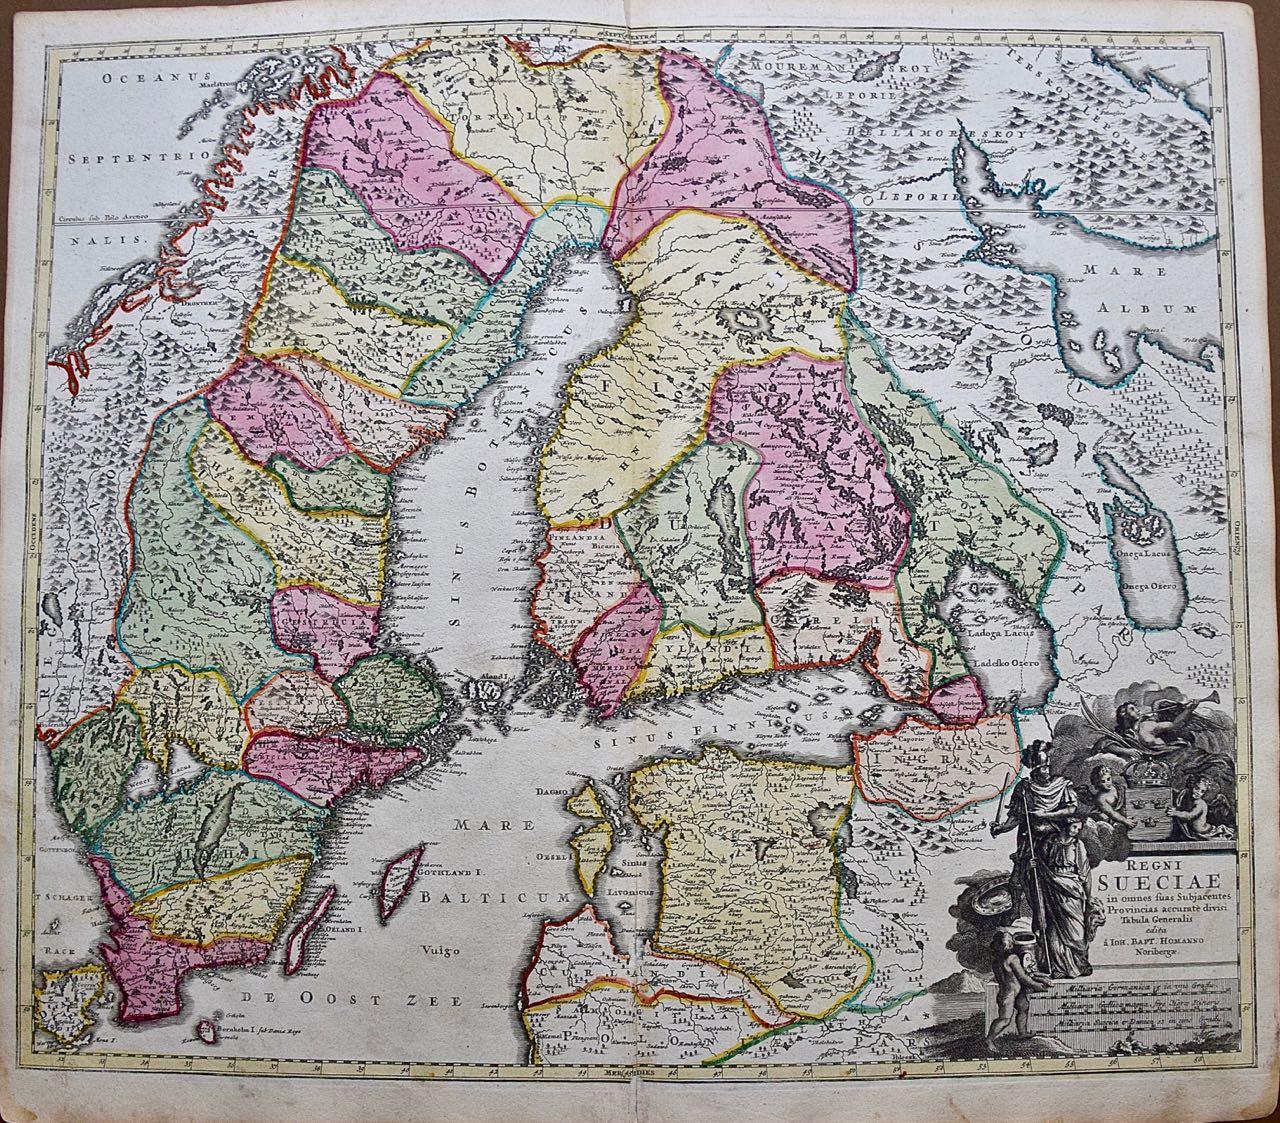 Sweden and Adjacent Portions of Scandinavia: A Hand-colored 18th C. Homann Map